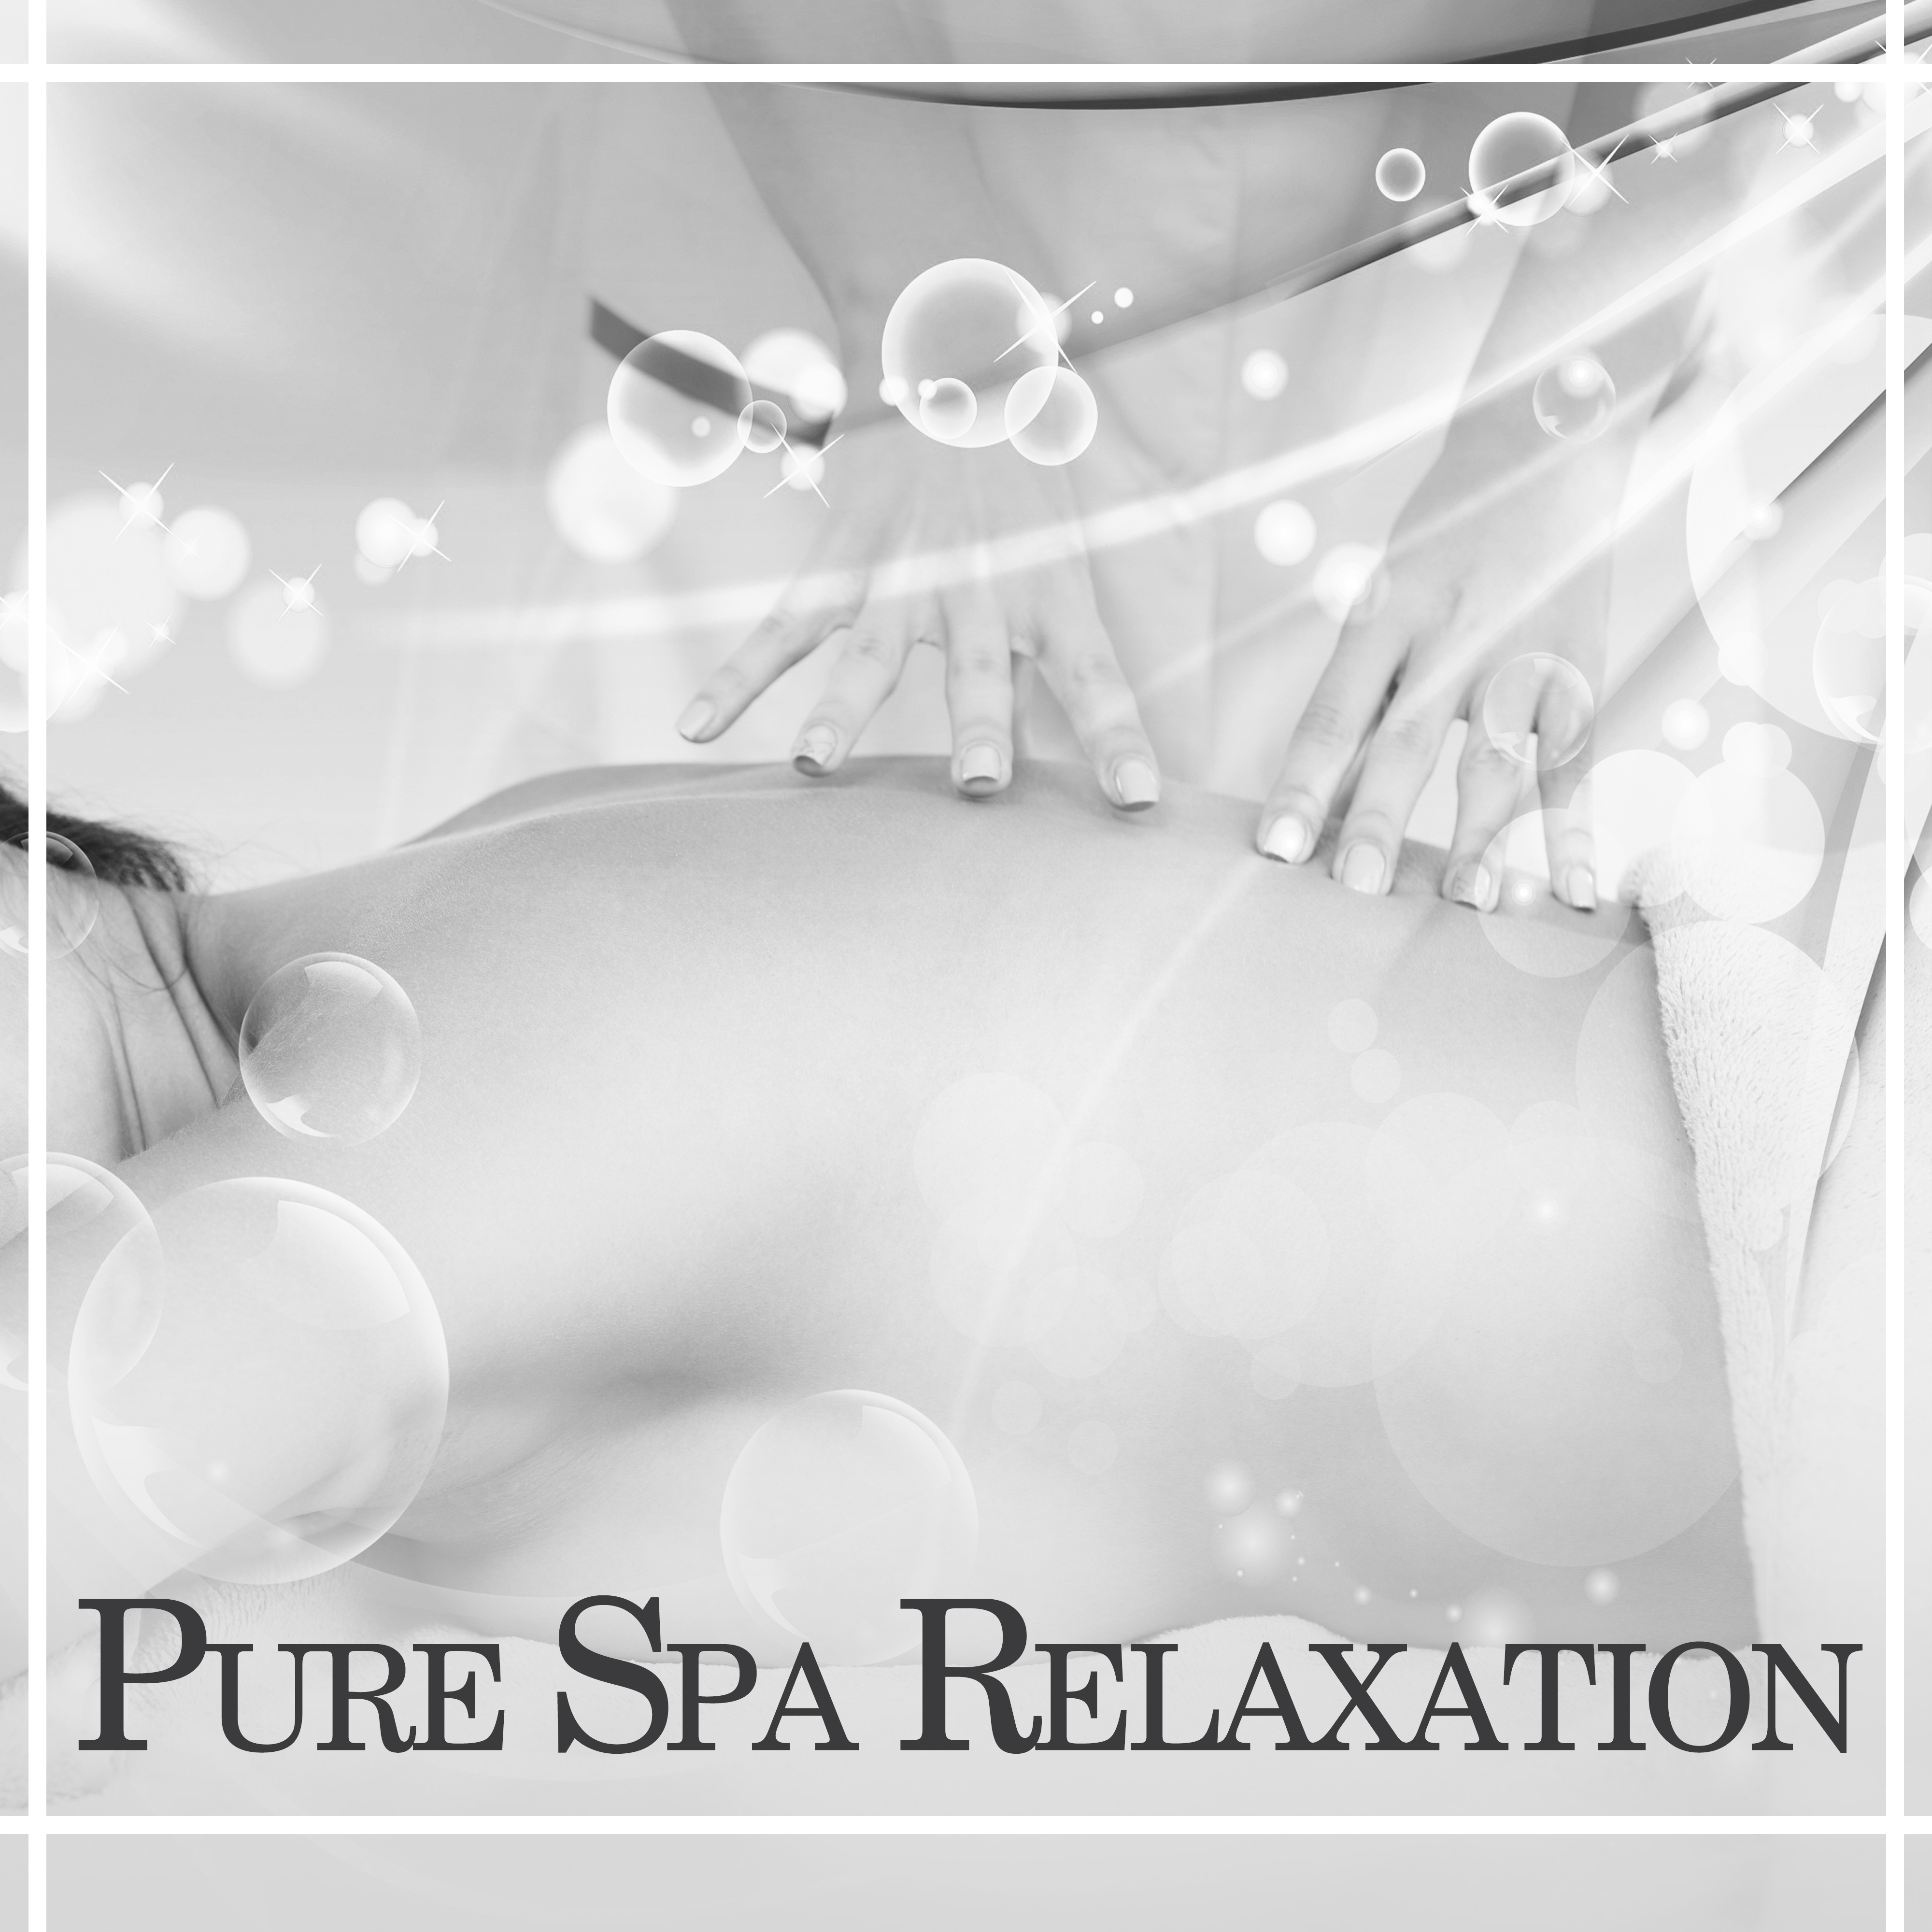 Pure Spa Relaxation – New Age Music, Sounds of Nature, Music for Massage, Spa, Relaxation, Harmony Life, Zen